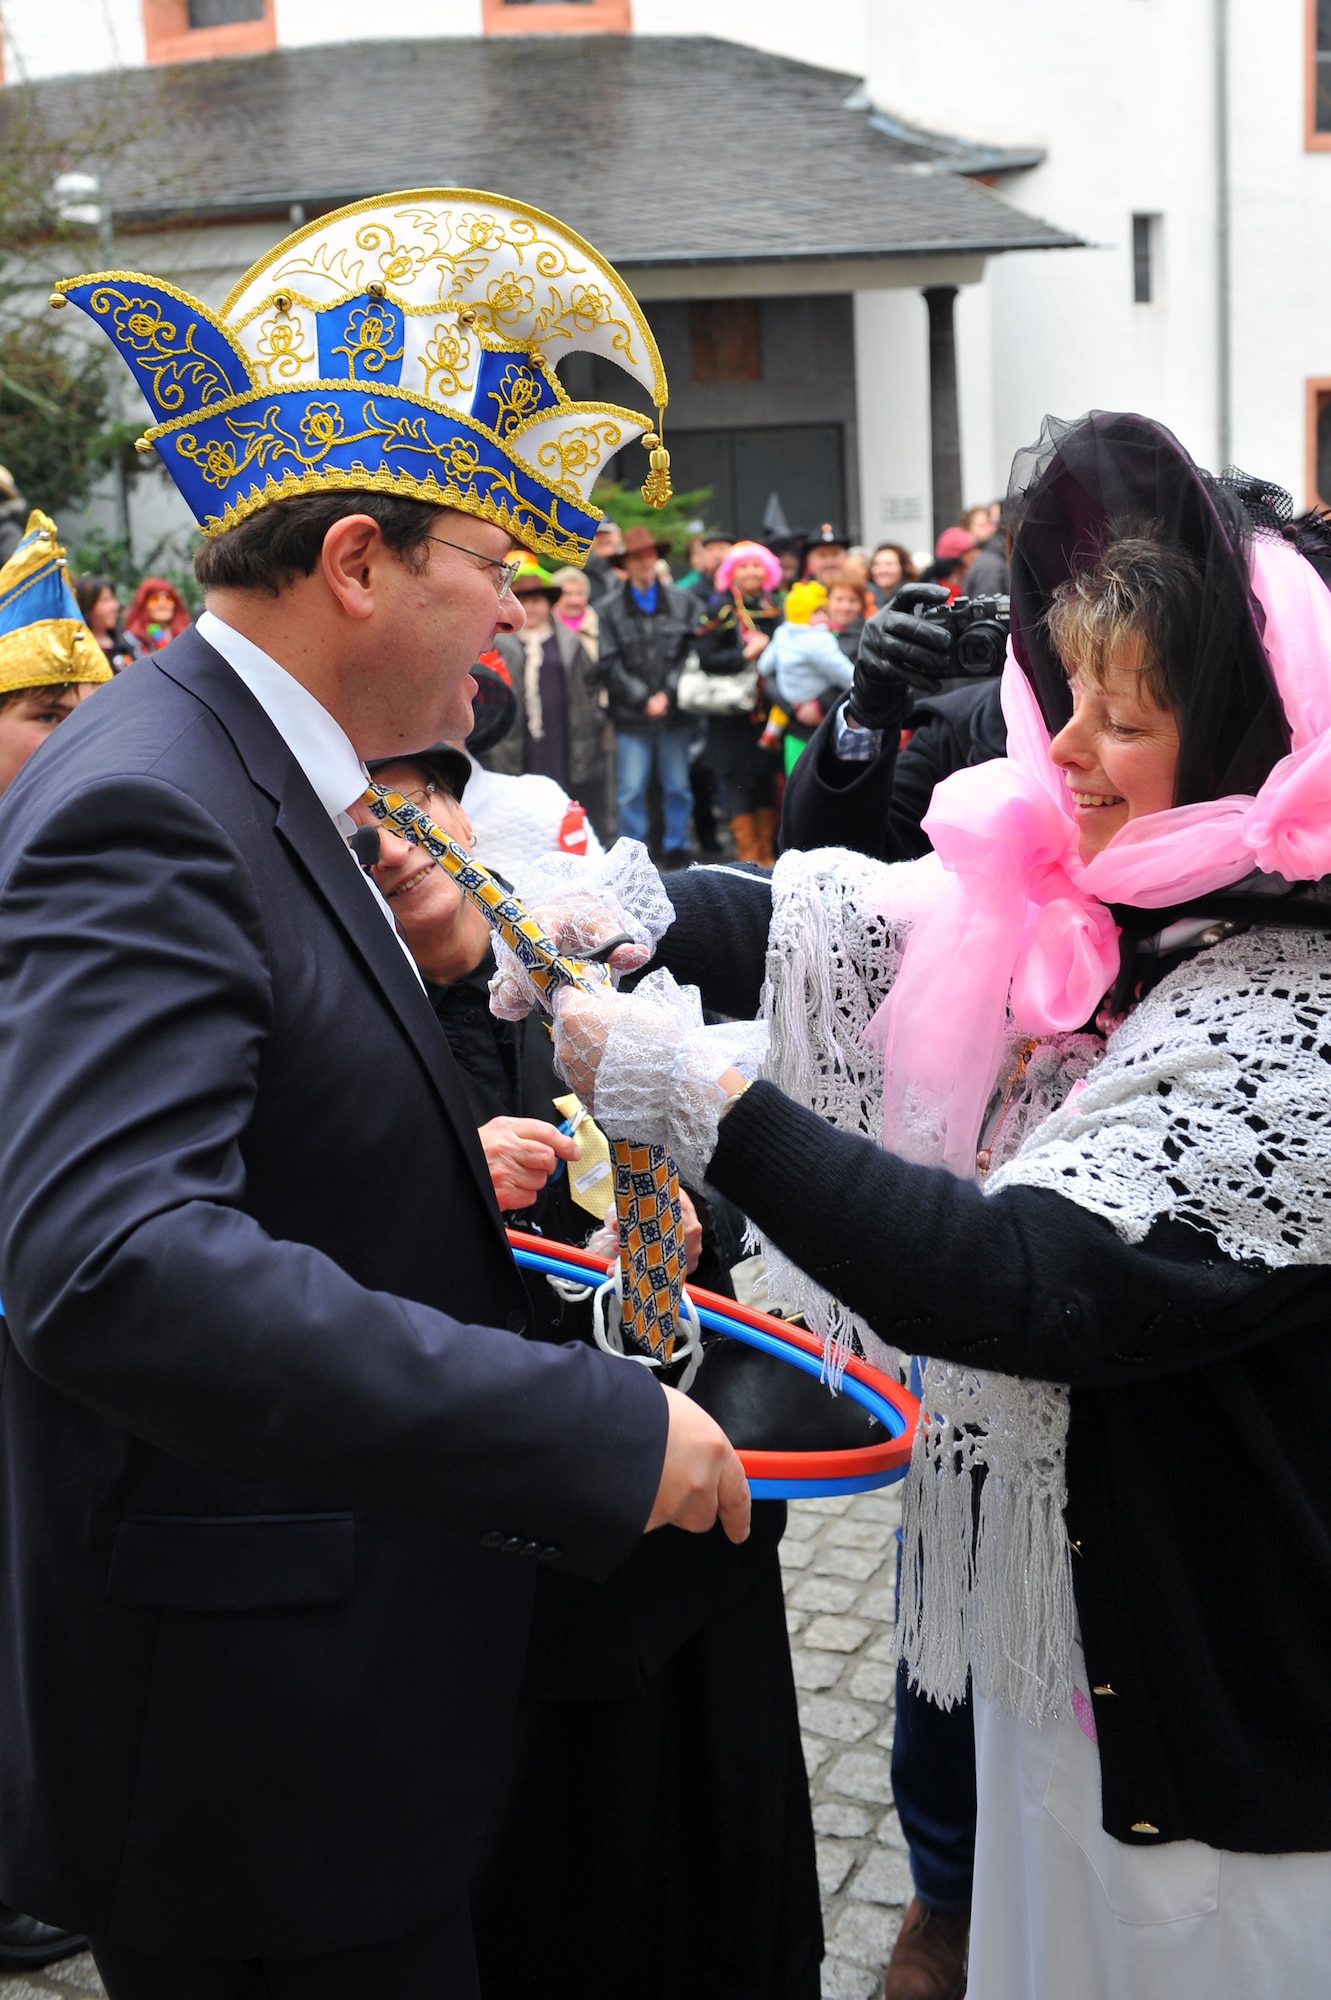 BITBURG, Germany – A Fasching participant cuts the tie of Joachim Kandels, Bitburg mayor, as tradition dictates during Ladies Fasching Day celebrations at the Bitburg Town Hall here Feb. 16. Ladies Fasching Day is a German celebration where women “take over” the city for the day. Once the ladies have “taken over” the city hall, the celebrations begin with dancing and parading throughout the city. The traditional Fasching celebrations begin the Thursday prior to Lent at the 11th minute past the 11th hour, continue until Ash Wednesday and allow people to indulge before the Lent season. (U.S. Air Force photo by Airman 1st Class Dillon Davis/Released)